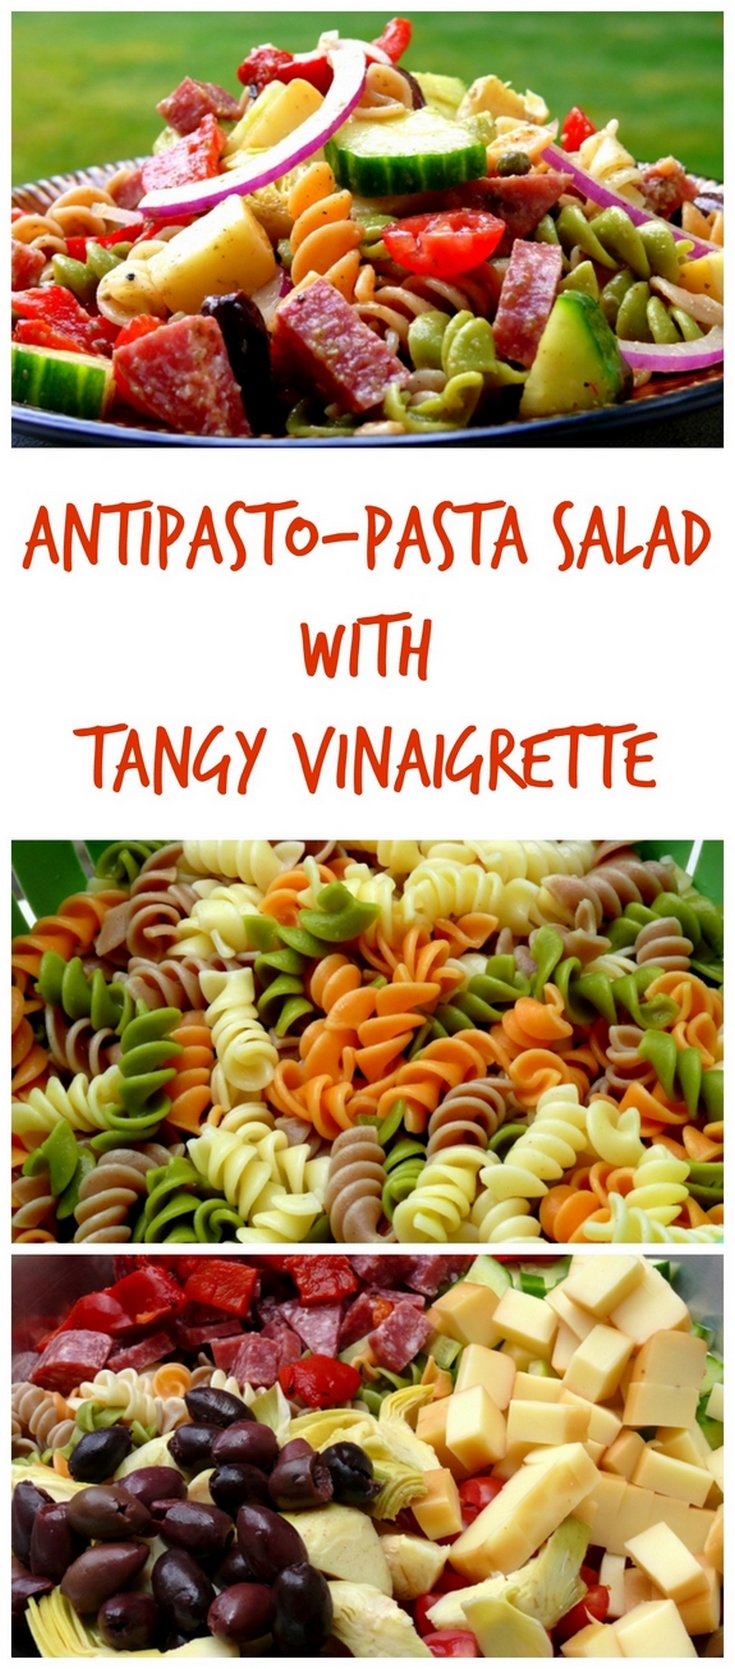 VIDEO + Recipe: This Antipasto Pasta Salad with Tangy Red Wine Vinaigrette is a favorite for a potluck dinner. Every bite of this salad is packed with deliciousness from NoblePig.com. via @cmpollak1